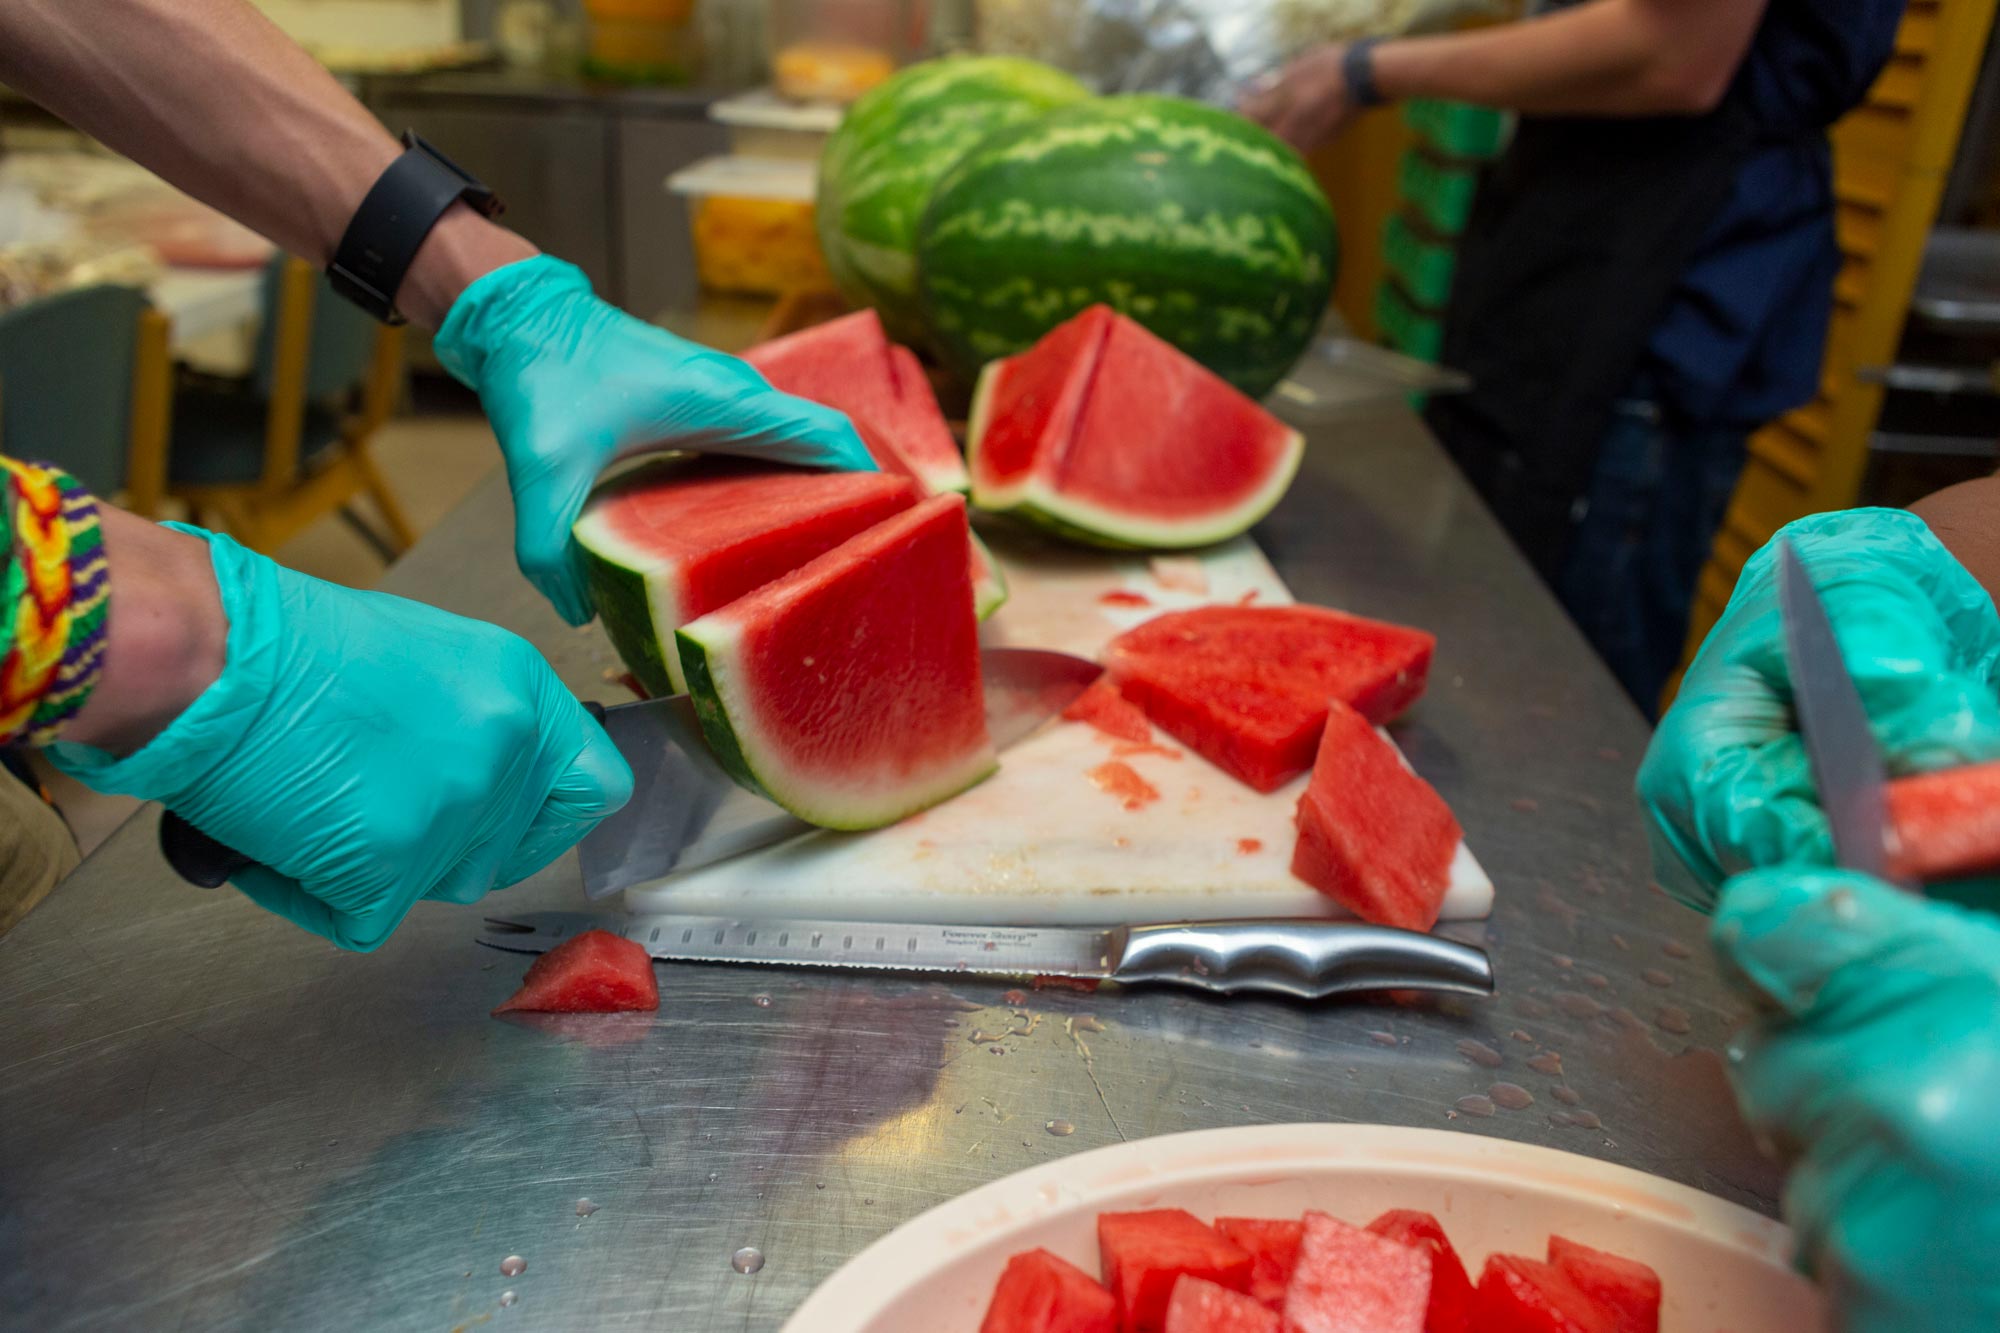 Watermelon being sliced for the lunch salad bar.